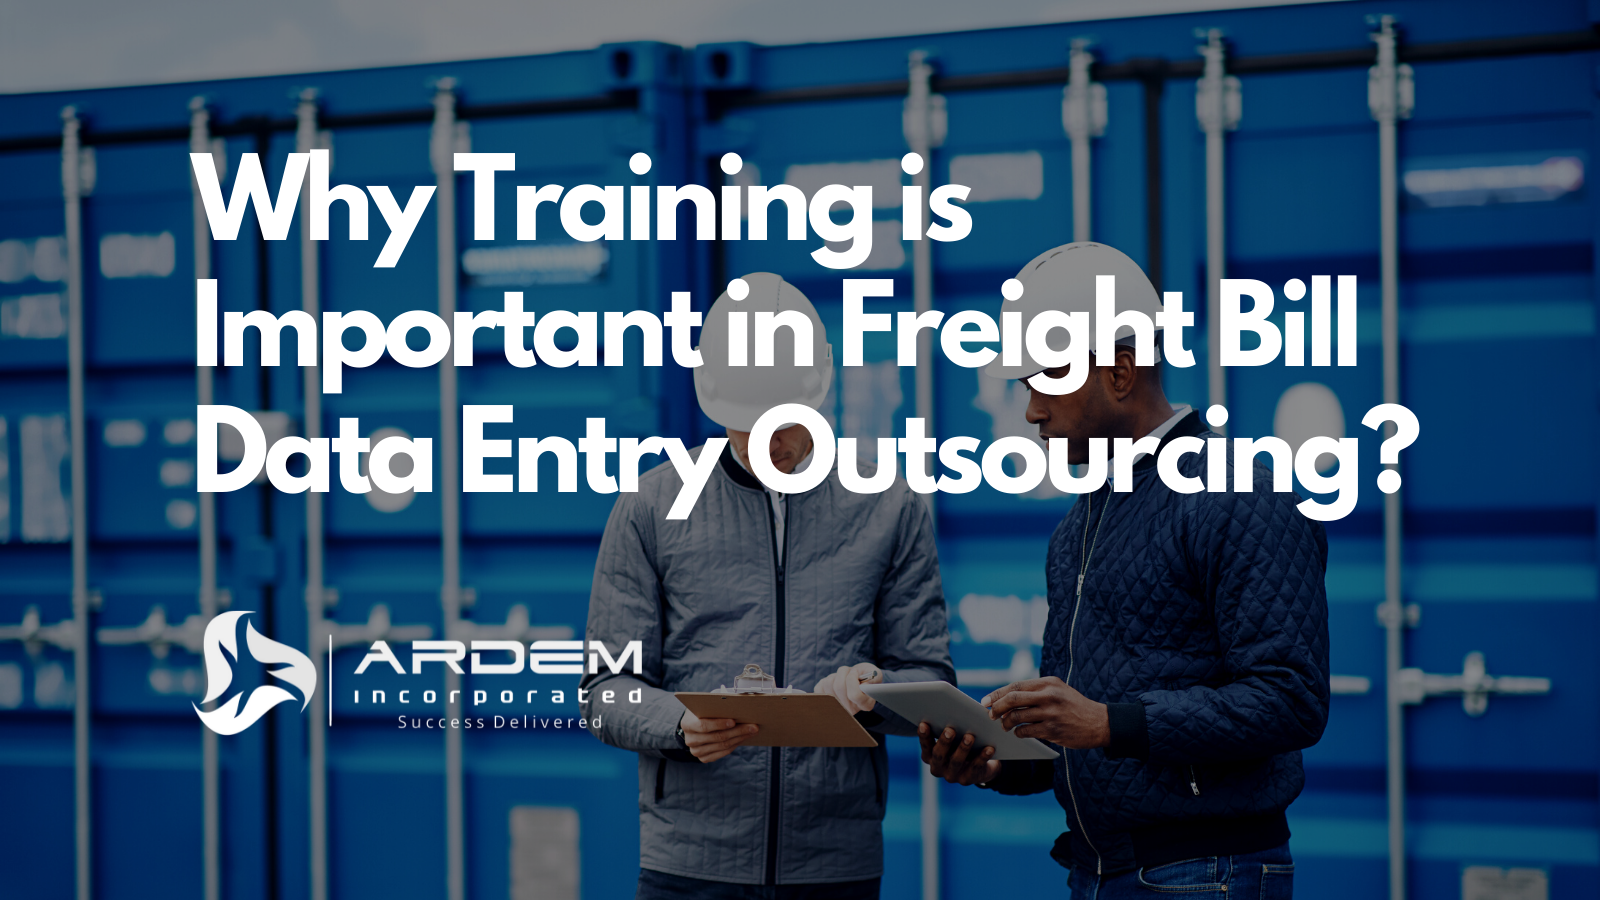 freight bill outsourcing data entry blog